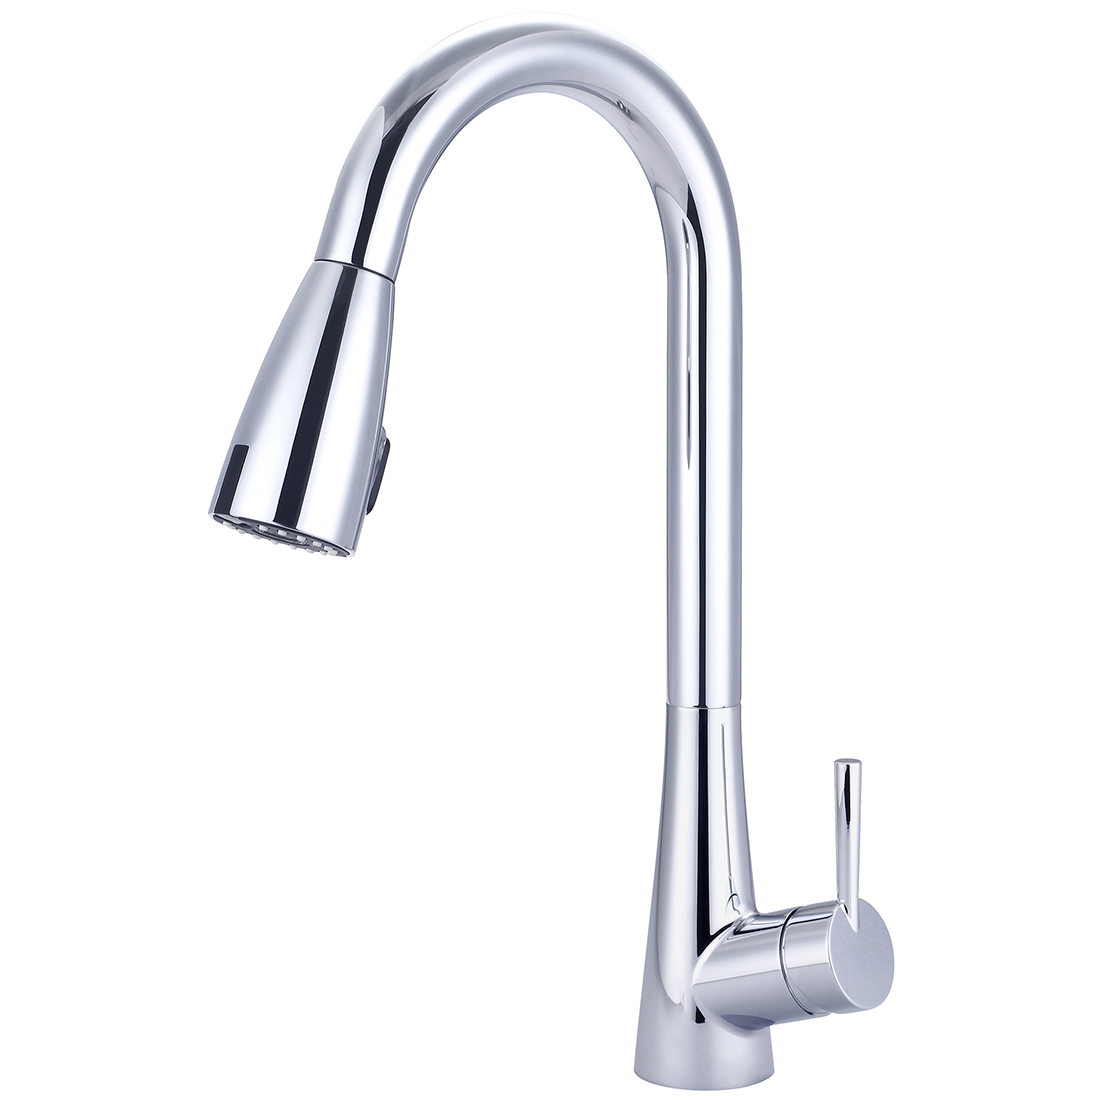 i2 Single Handle Pull-Down Kitchen Faucet Model# K-5020